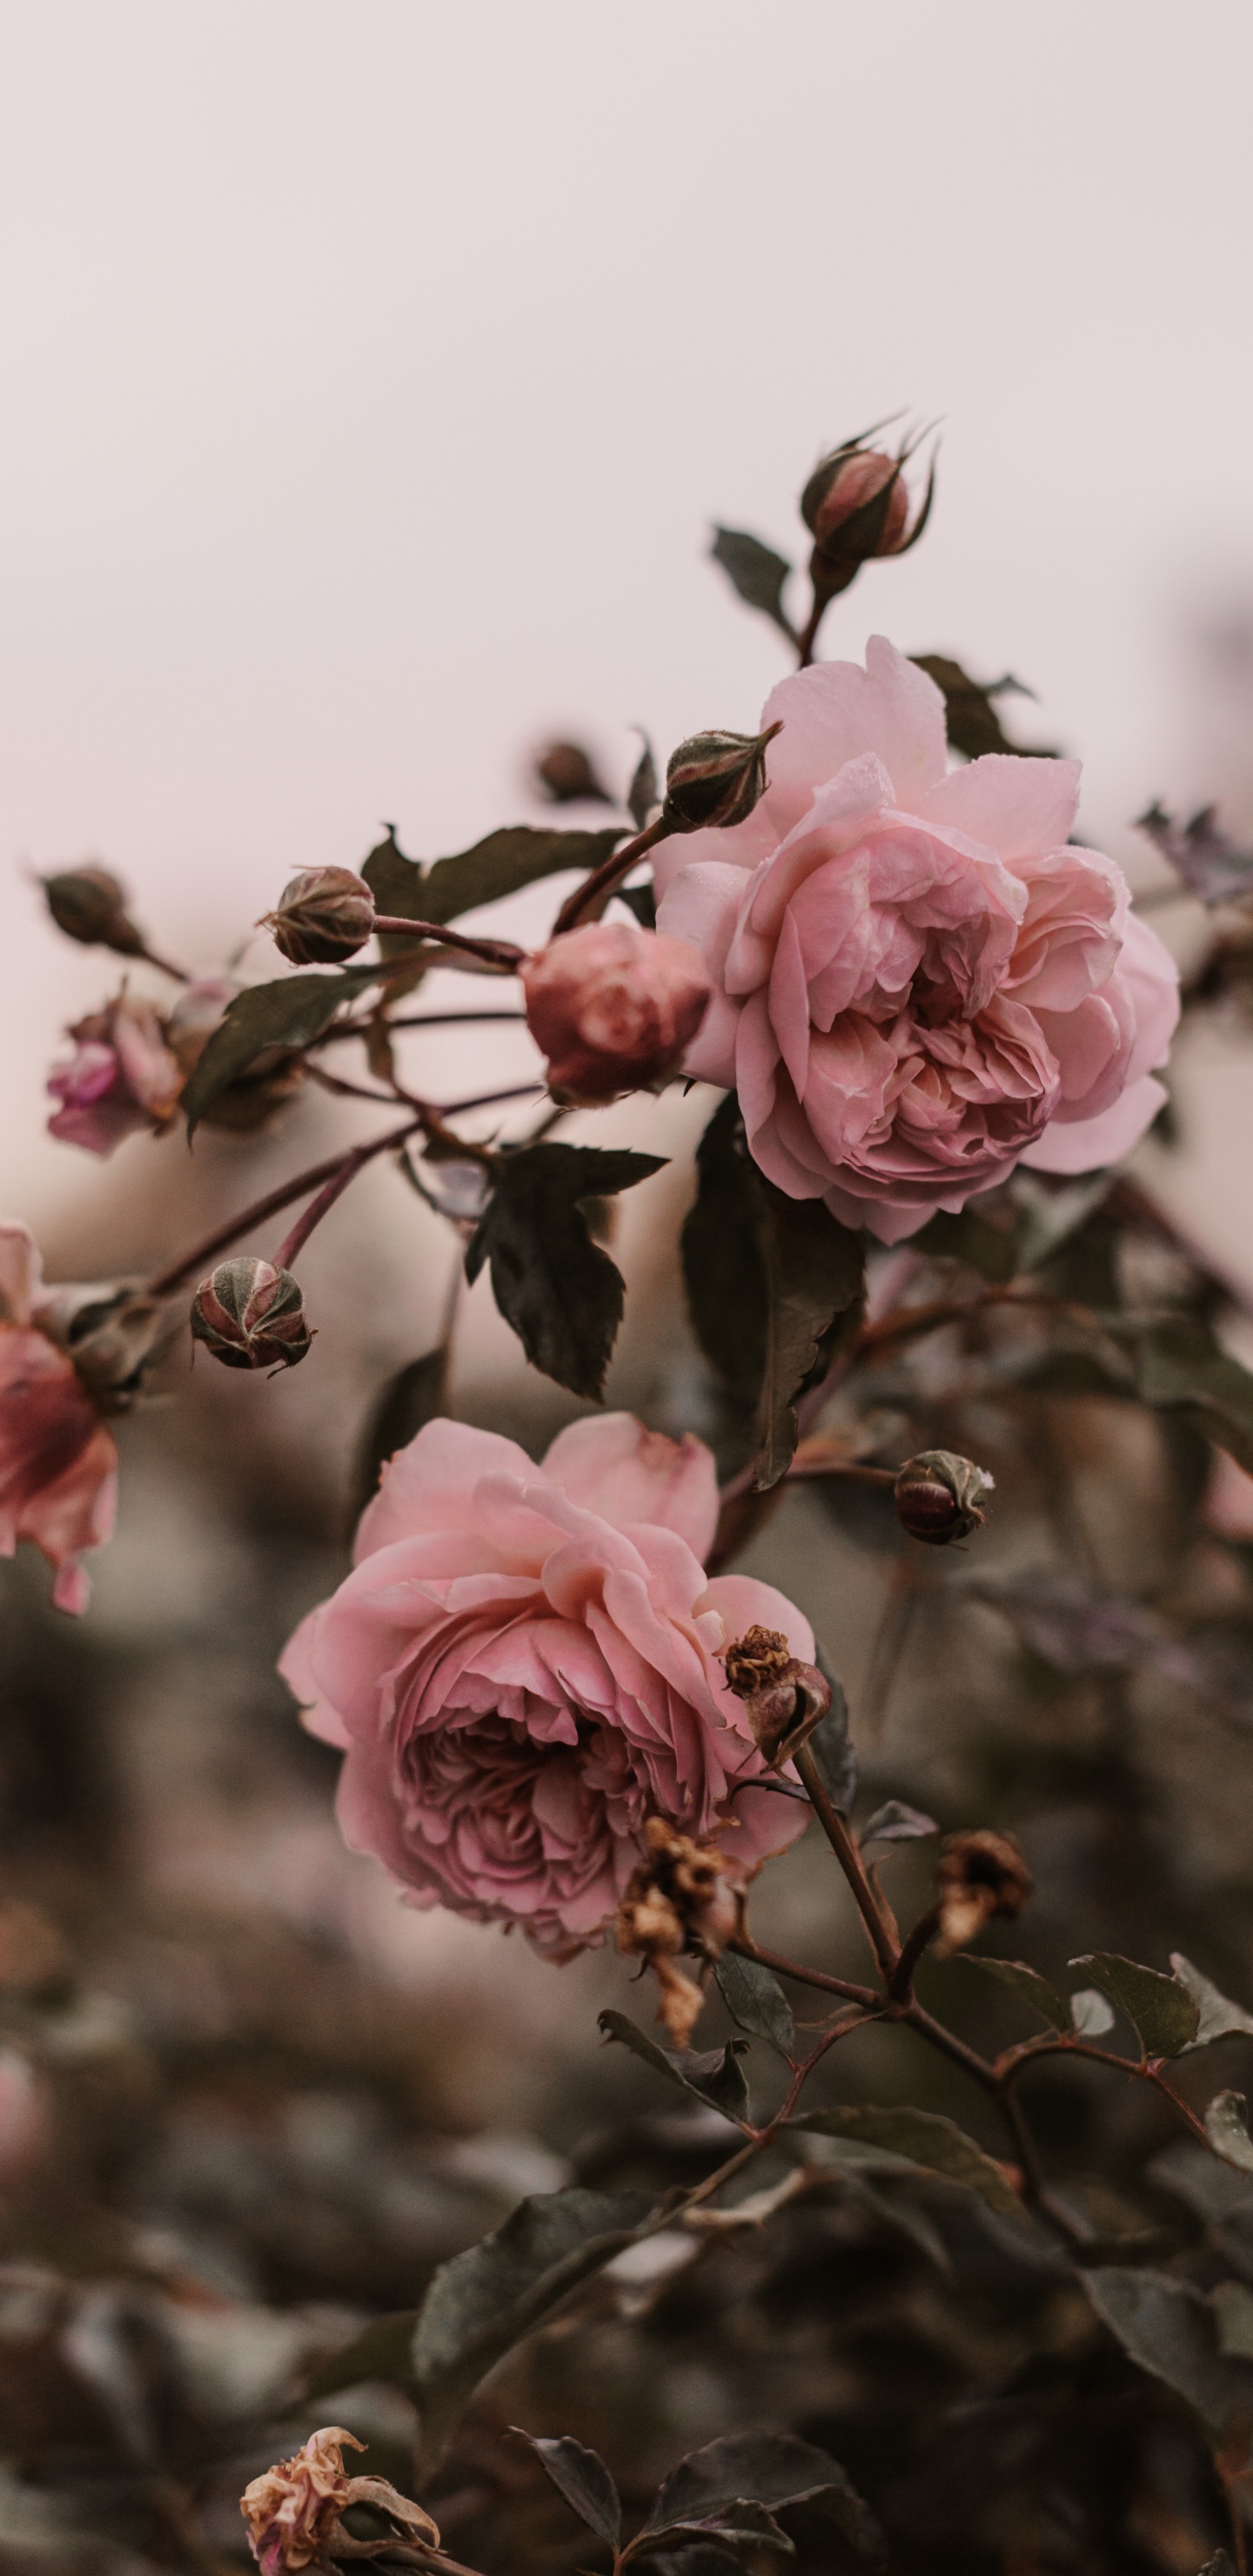 Pink Roses in Bloom During Daytime. Wallpaper in 1440x2960 Resolution